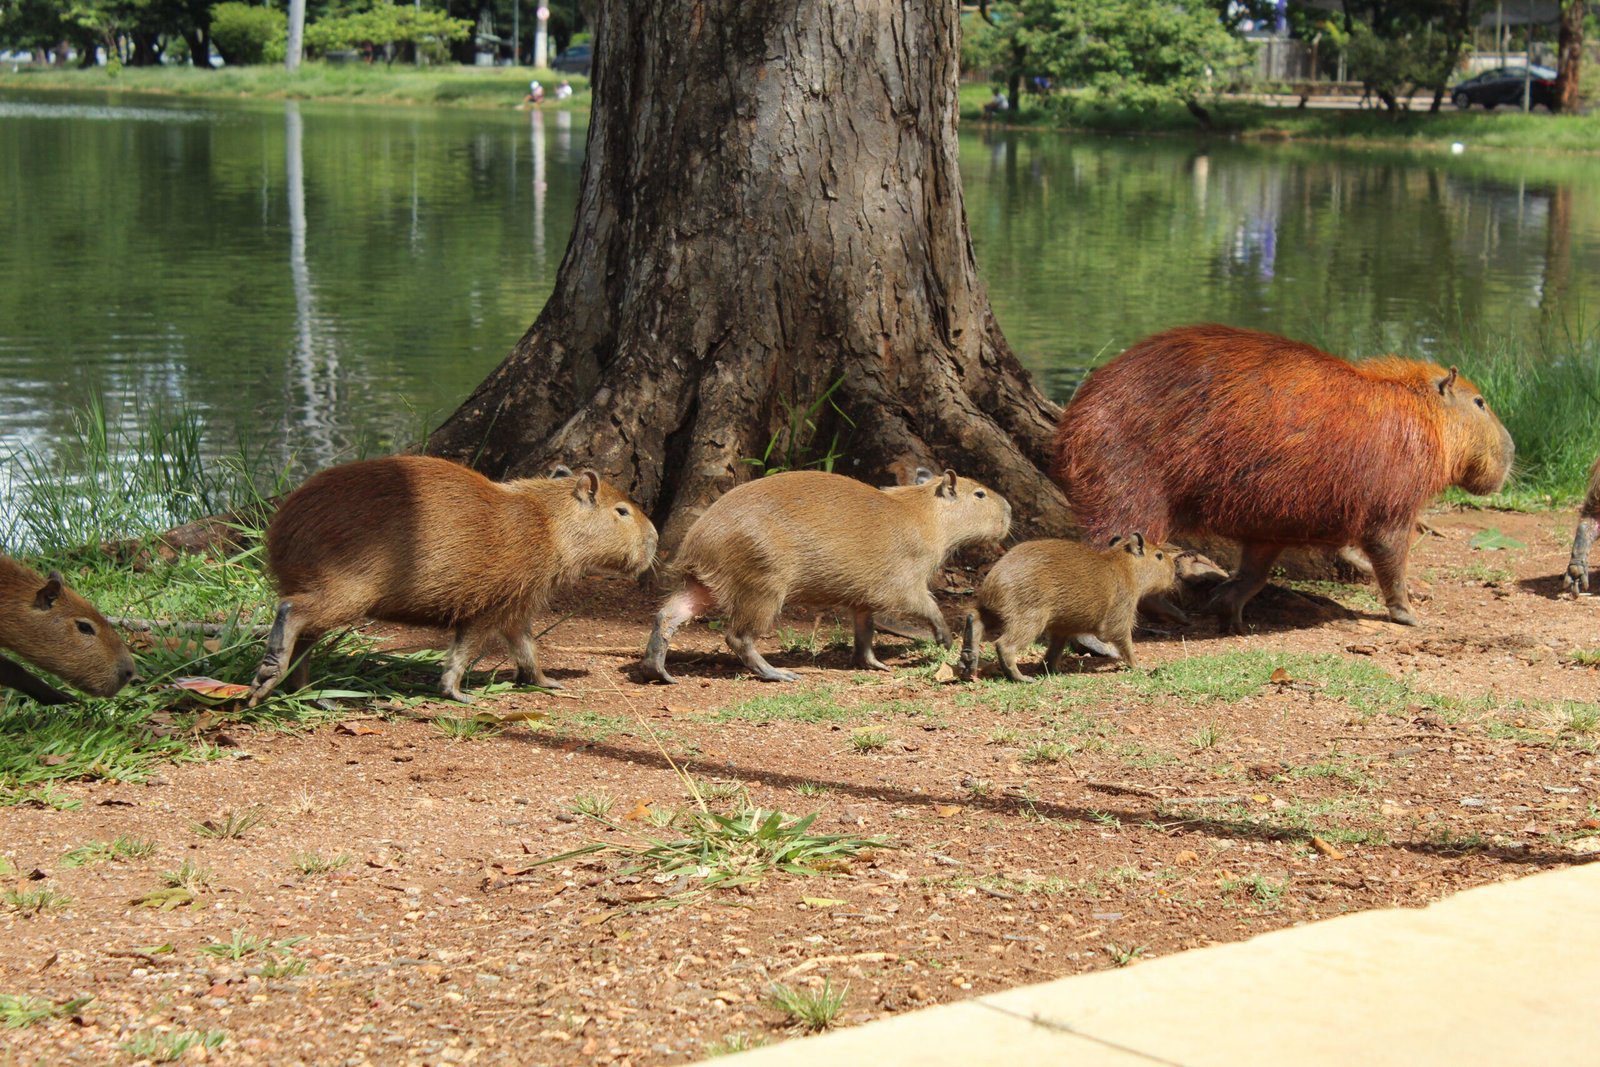 Can I legally own a capybara in my area?